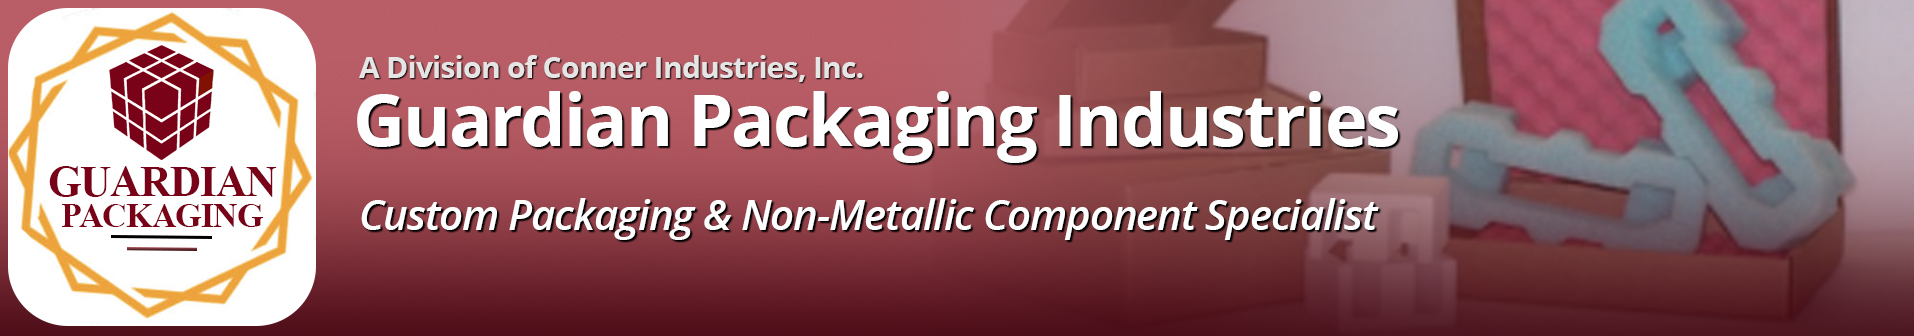 Guardian Packaging - a division of Conner Industries, Inc.